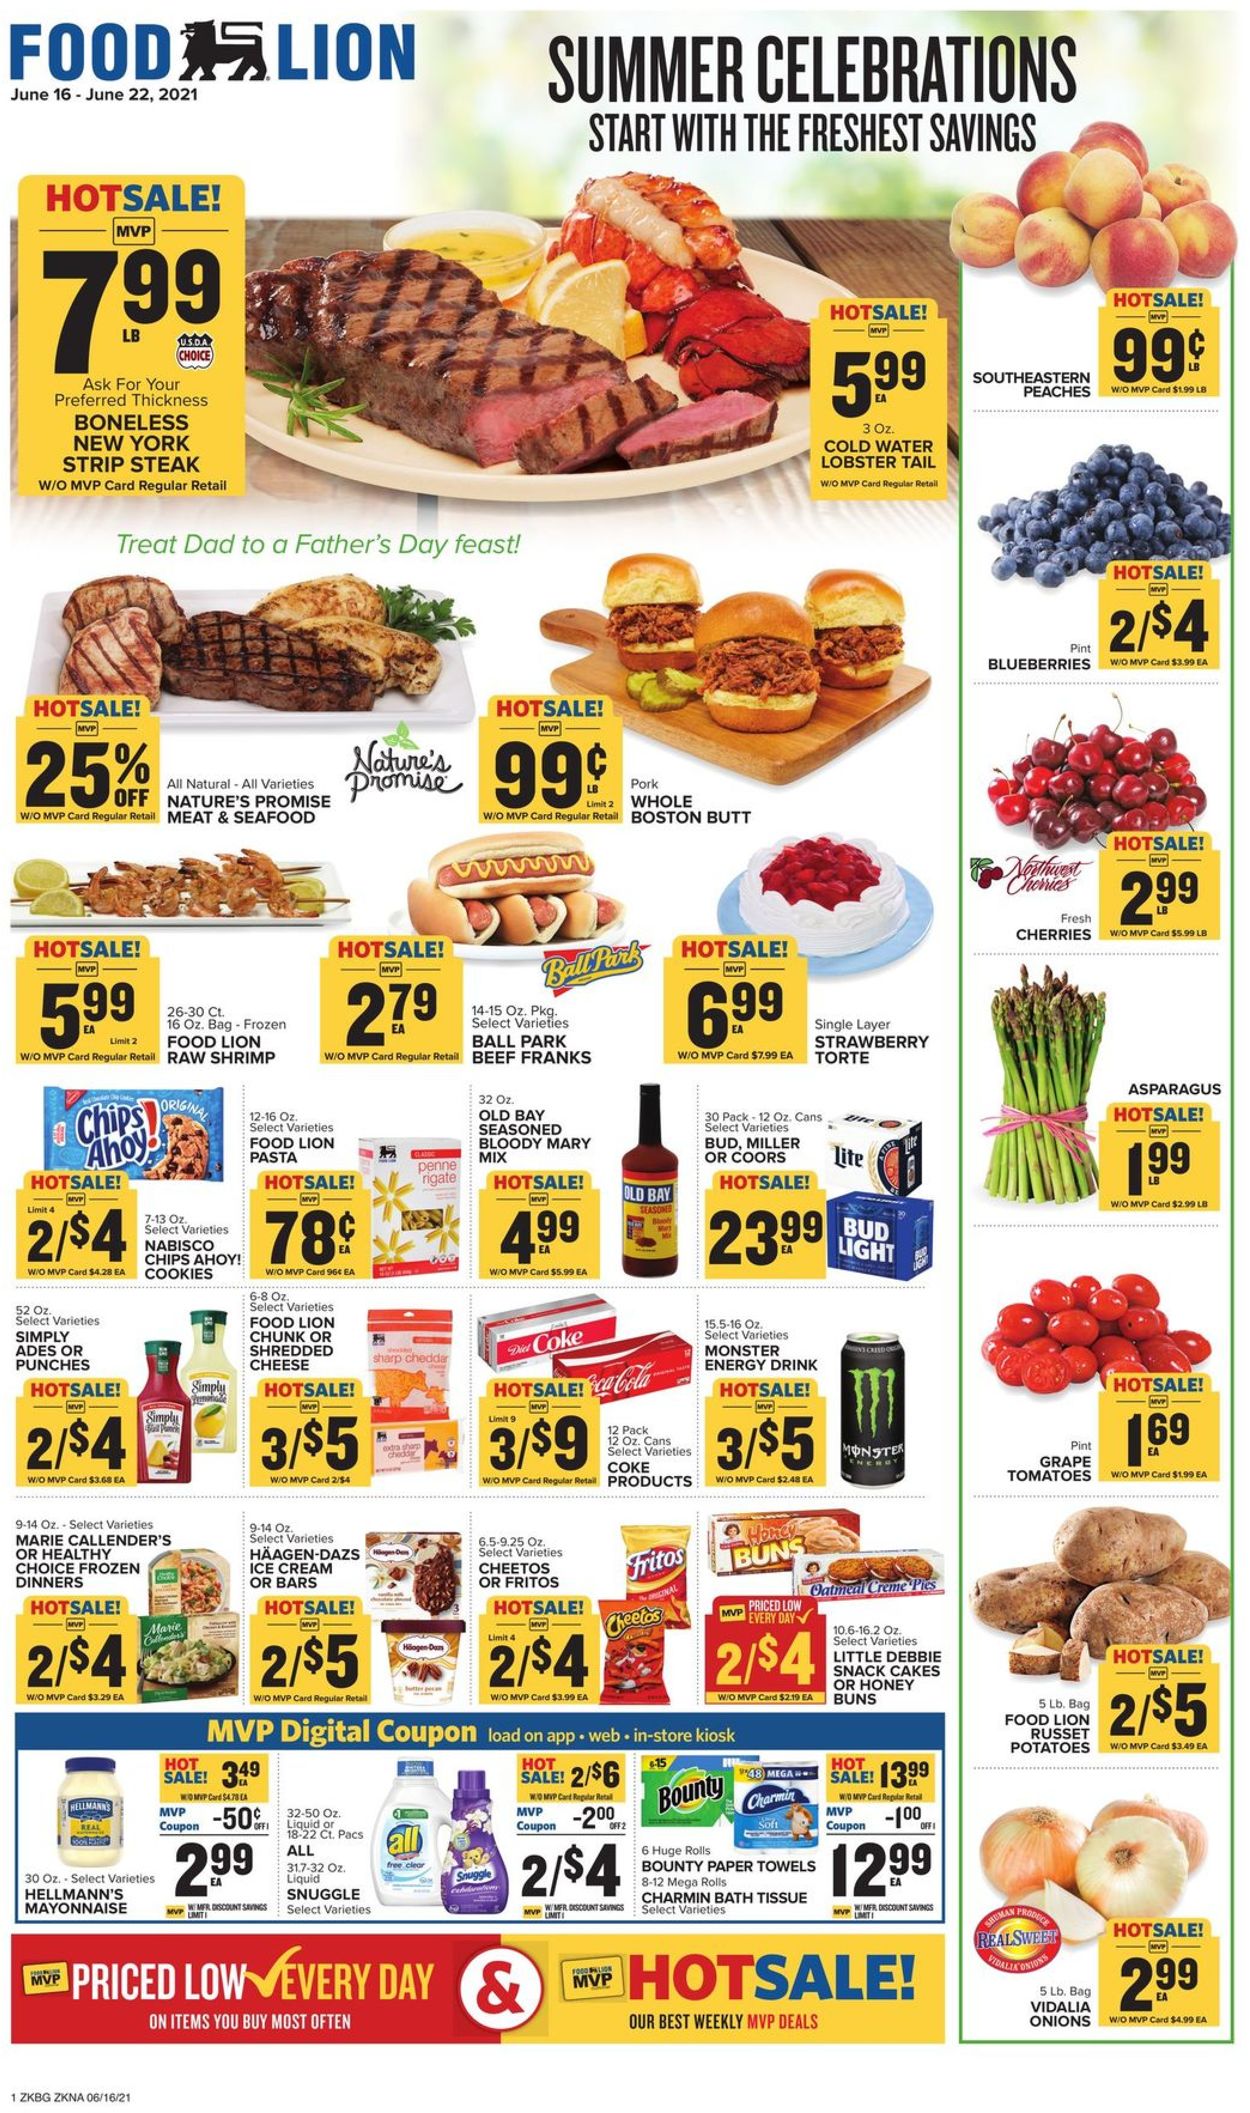 Food Lion Current weekly ad 06/16 - 06/22/2021 - frequent-ads.com